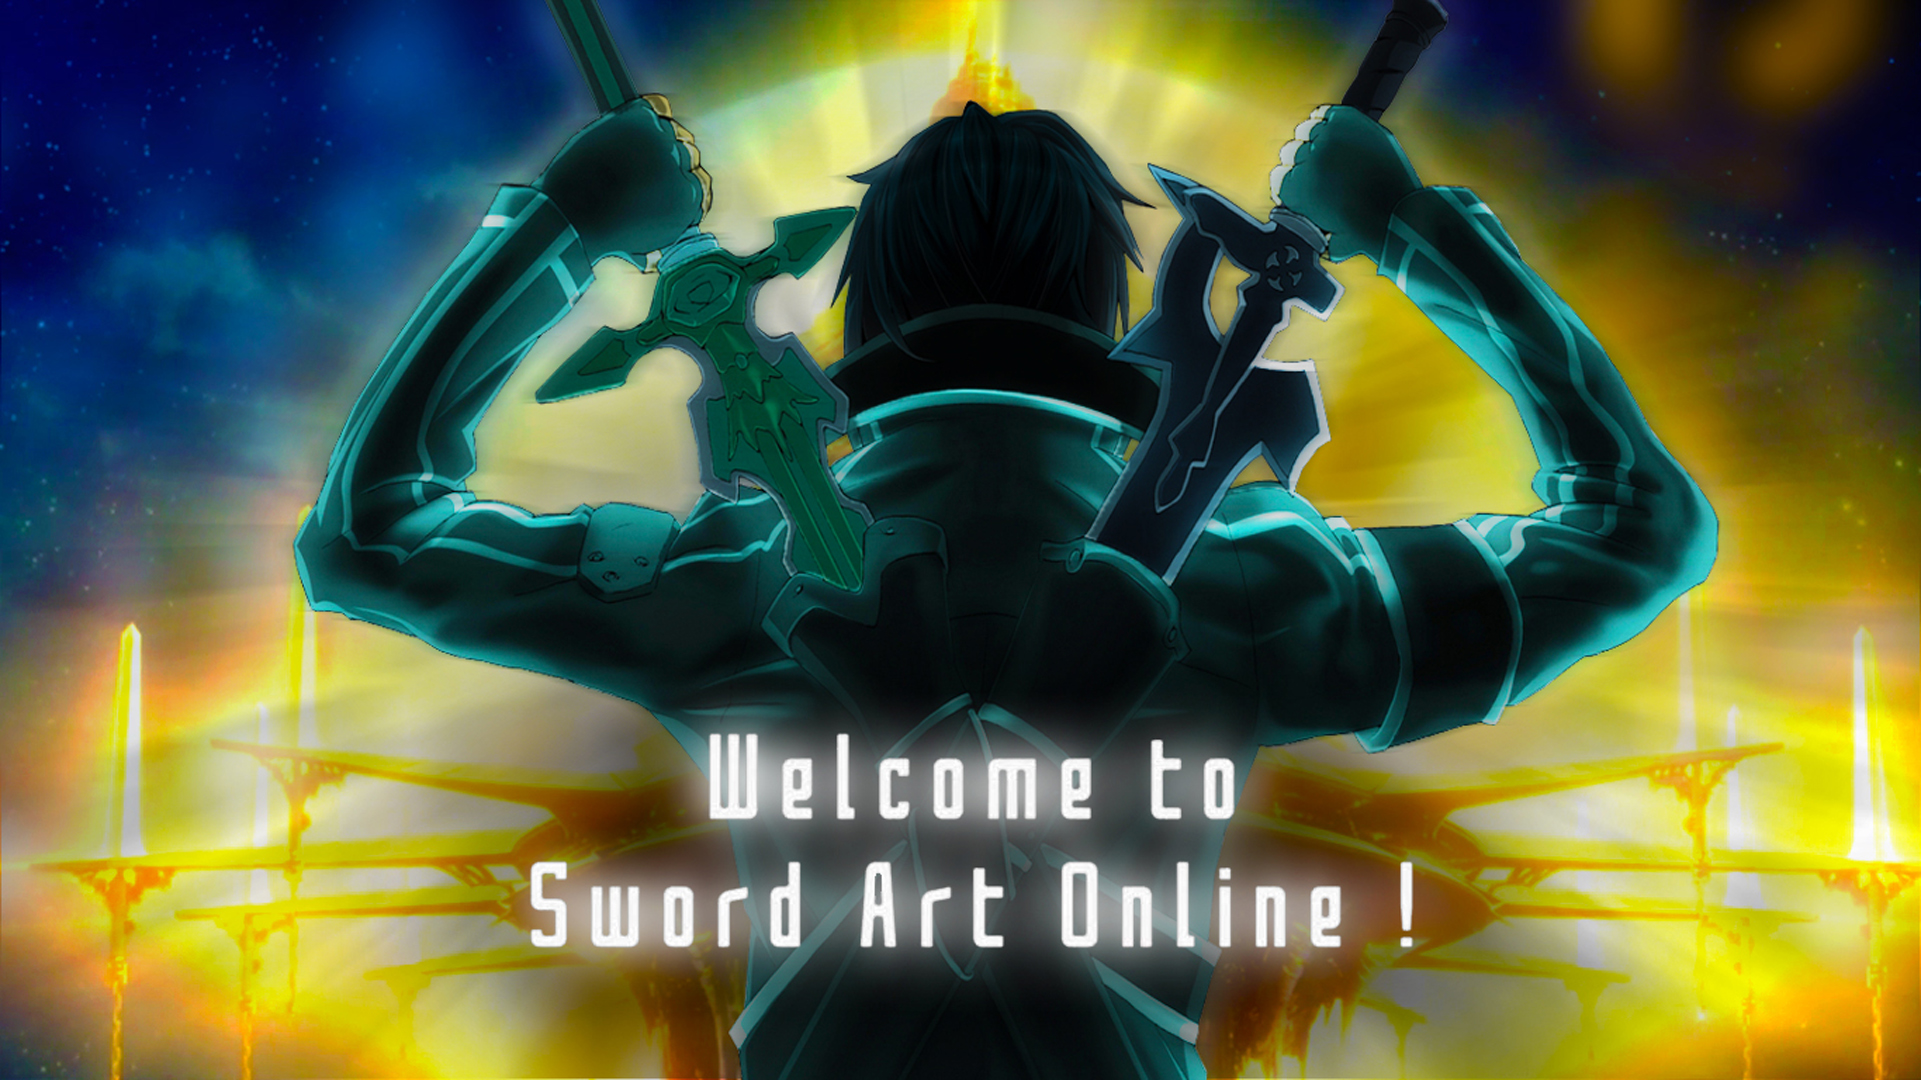 Sword Art Online – Welcome to Anime world!